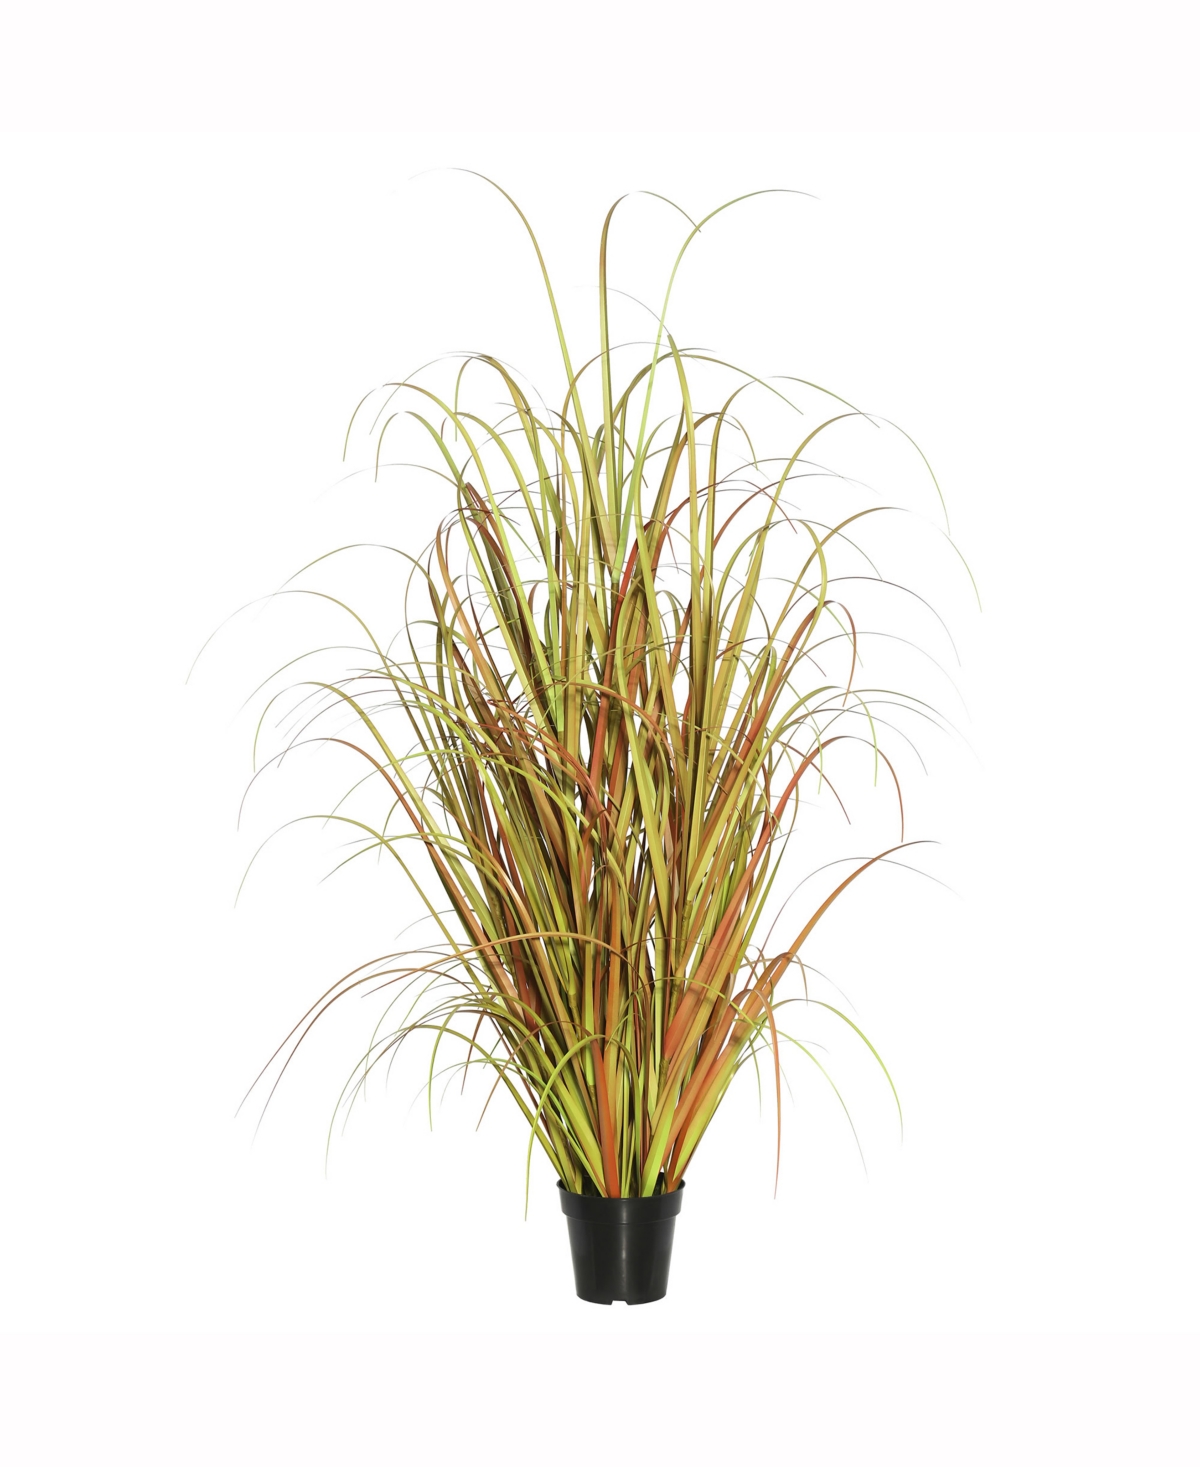 Vickerman 24" Pvc Artificial Potted Mixed Brown Grass X 140 In No Color